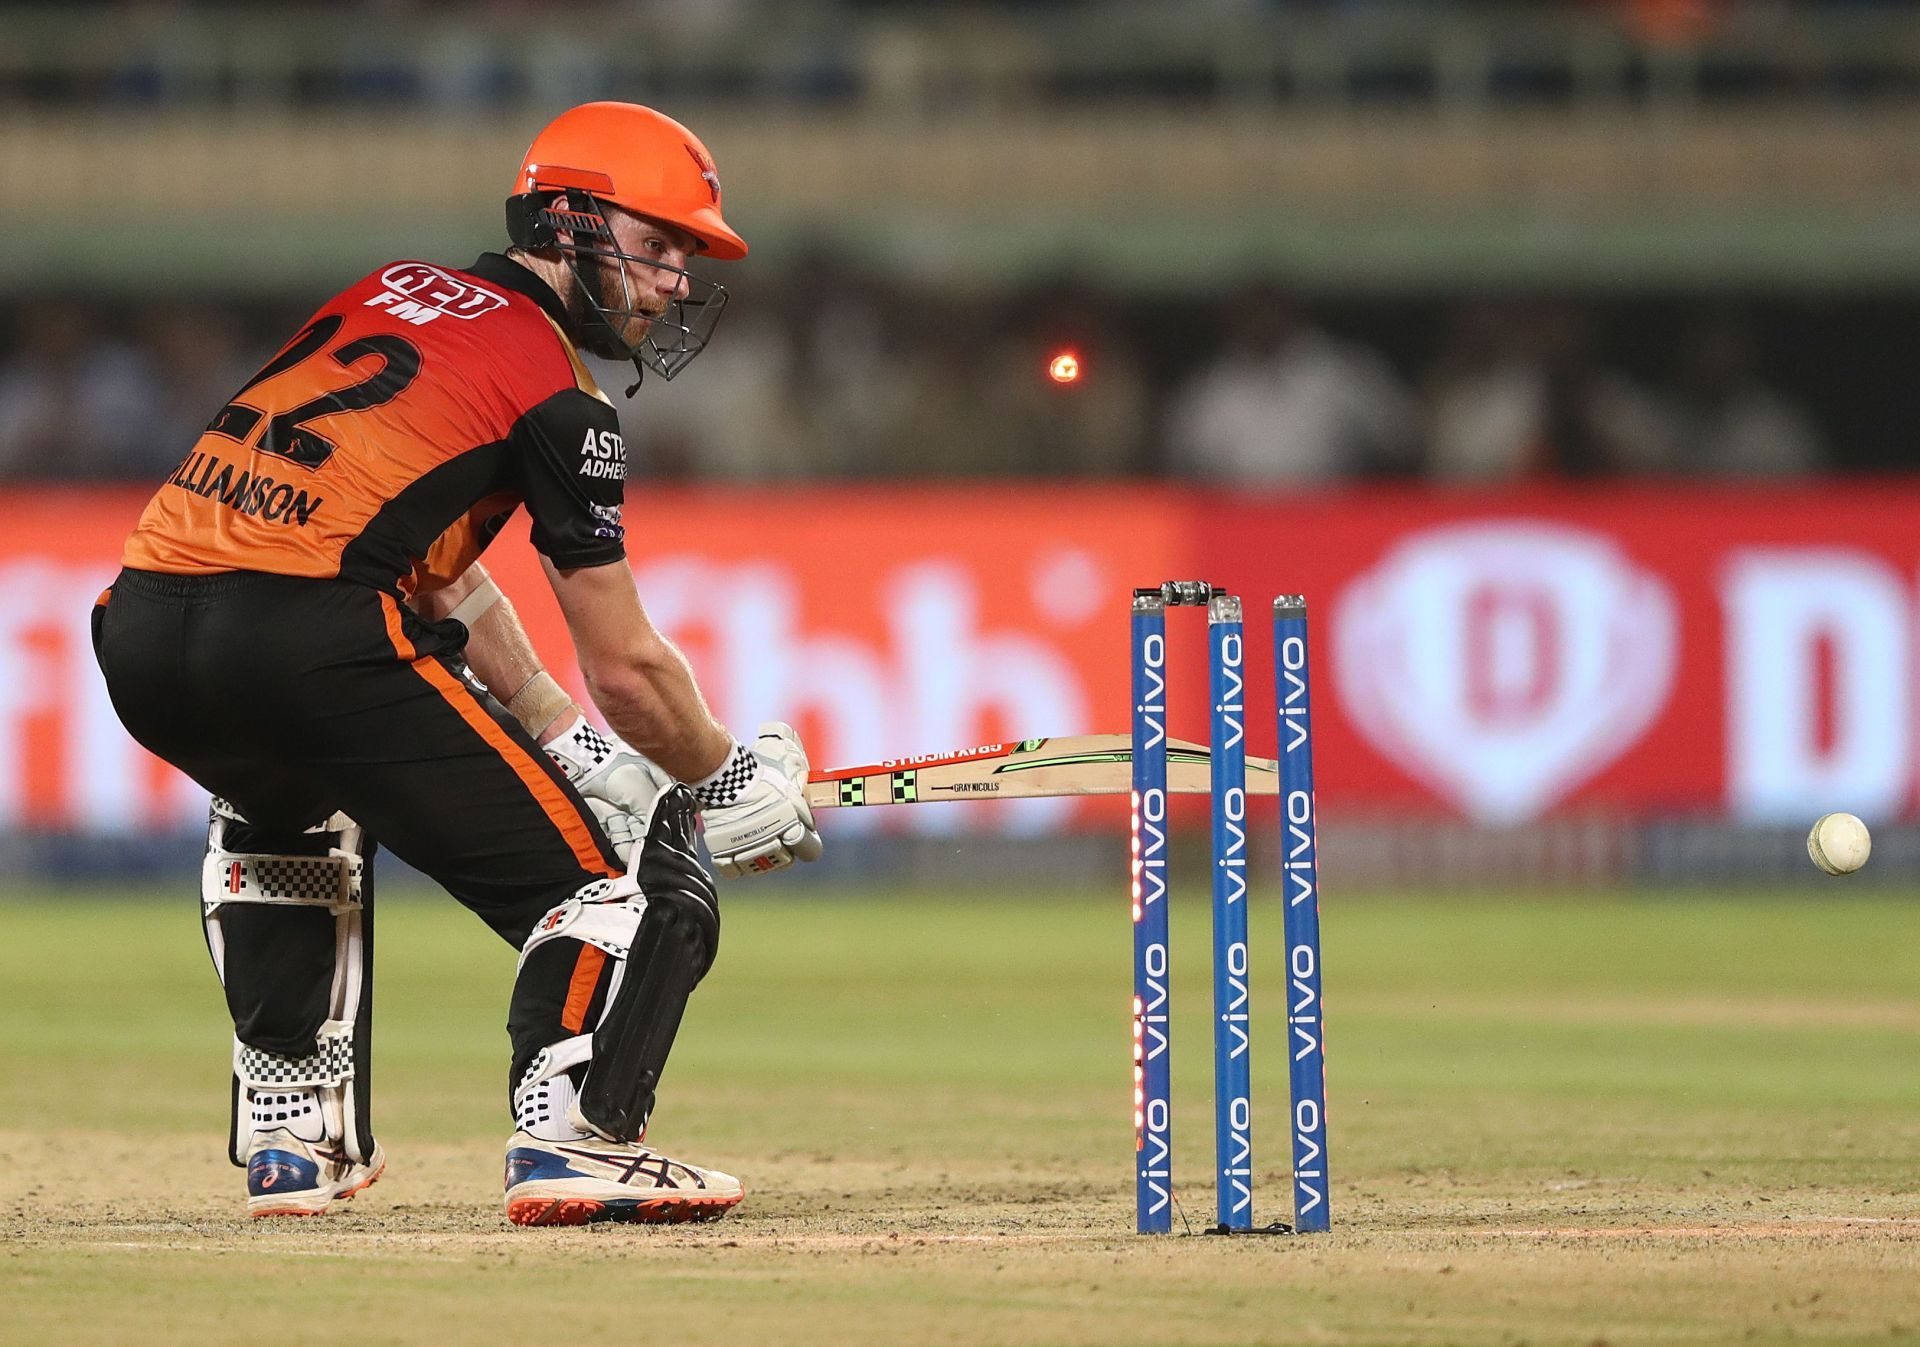 Sunrisers Hyderabad will start their IPL 2022 campaign tonight against Rajasthan Royals